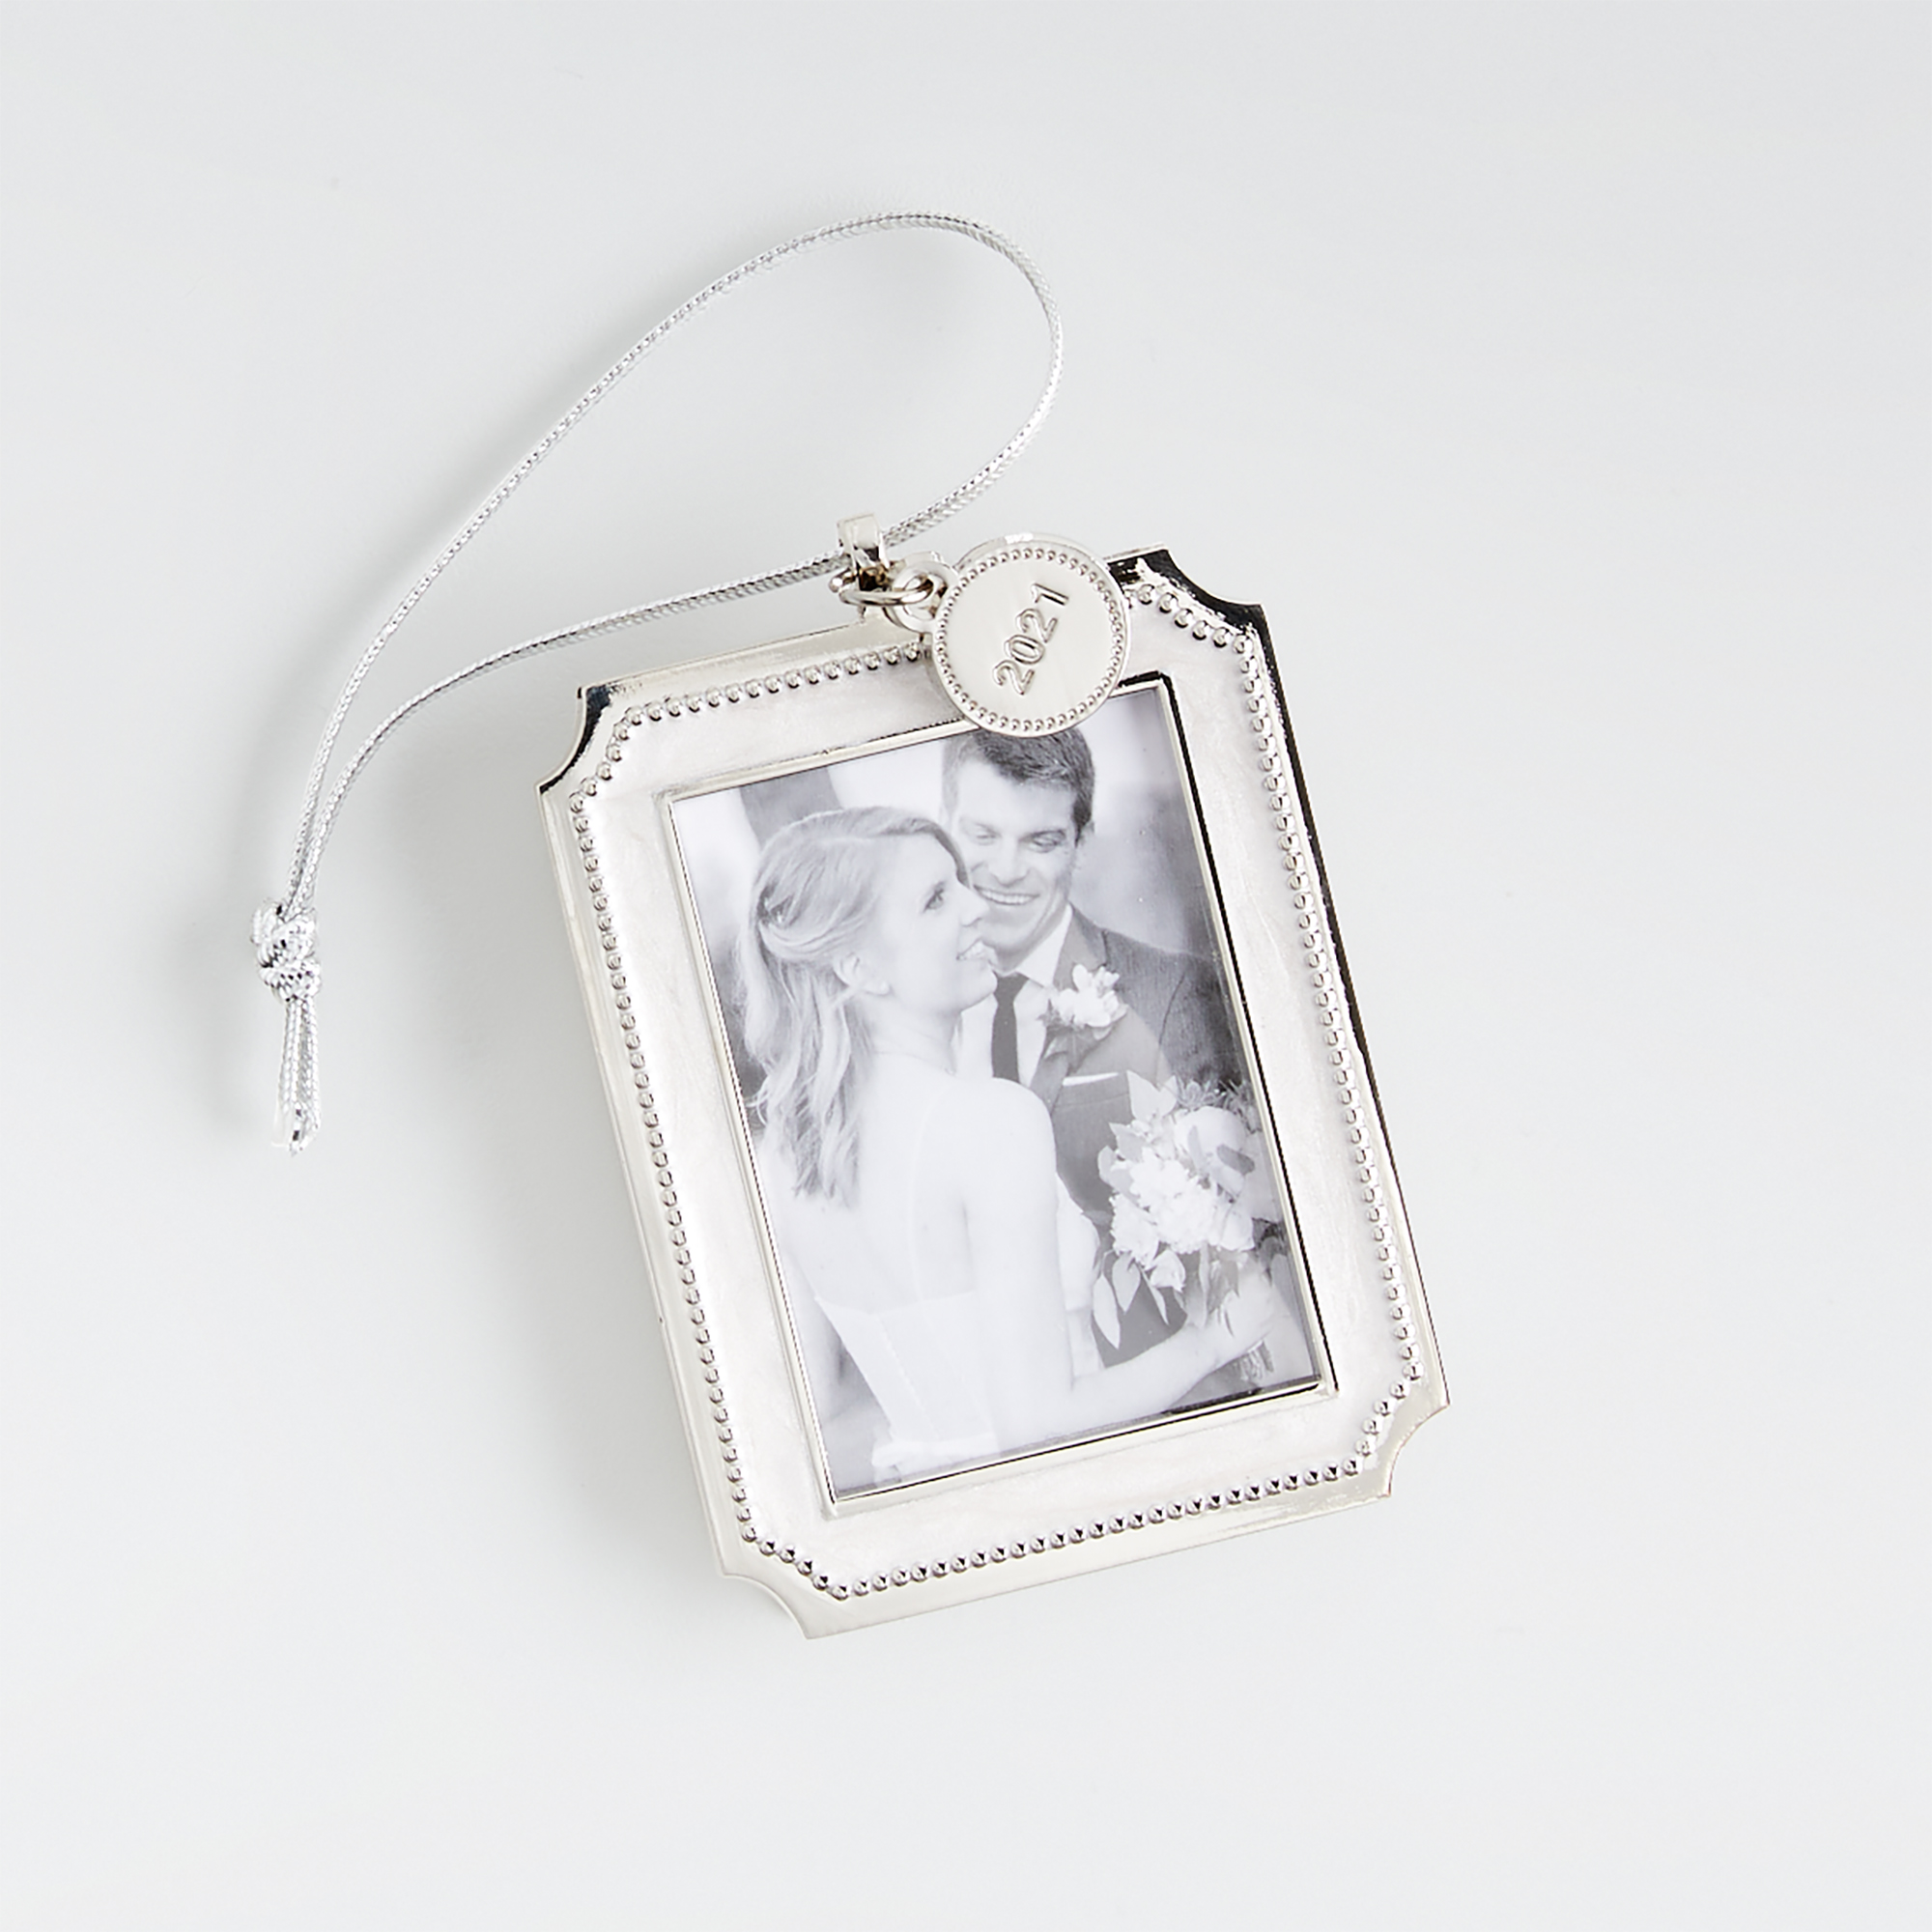 A christmas ornament picture frame with a wedding photo in it